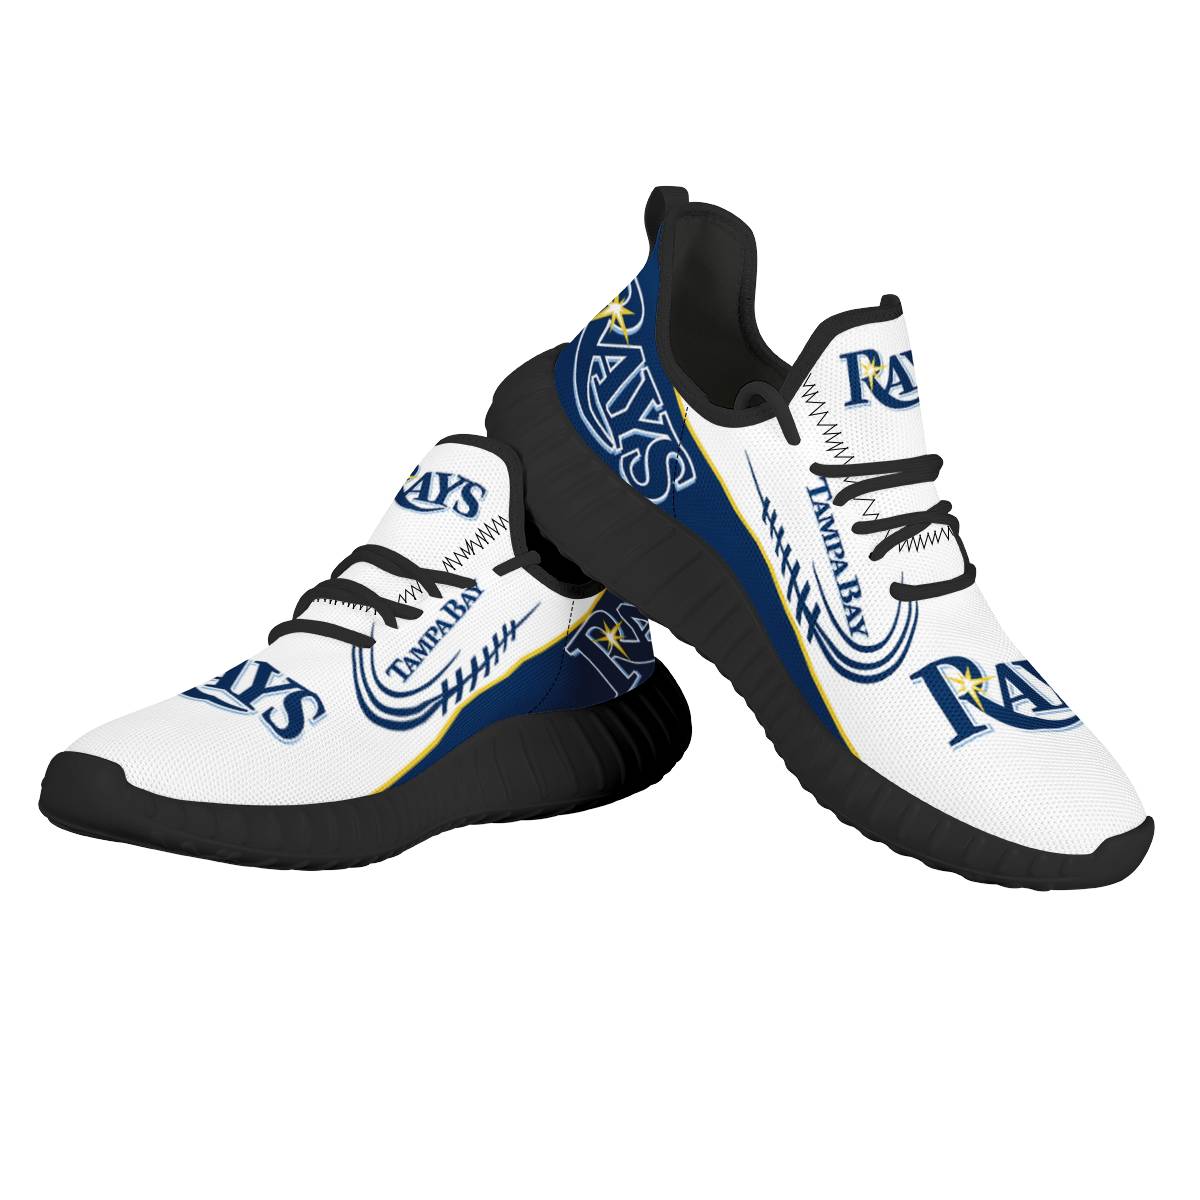 Men's Tampa Bay Rays Mesh Knit Sneakers/Shoes 005